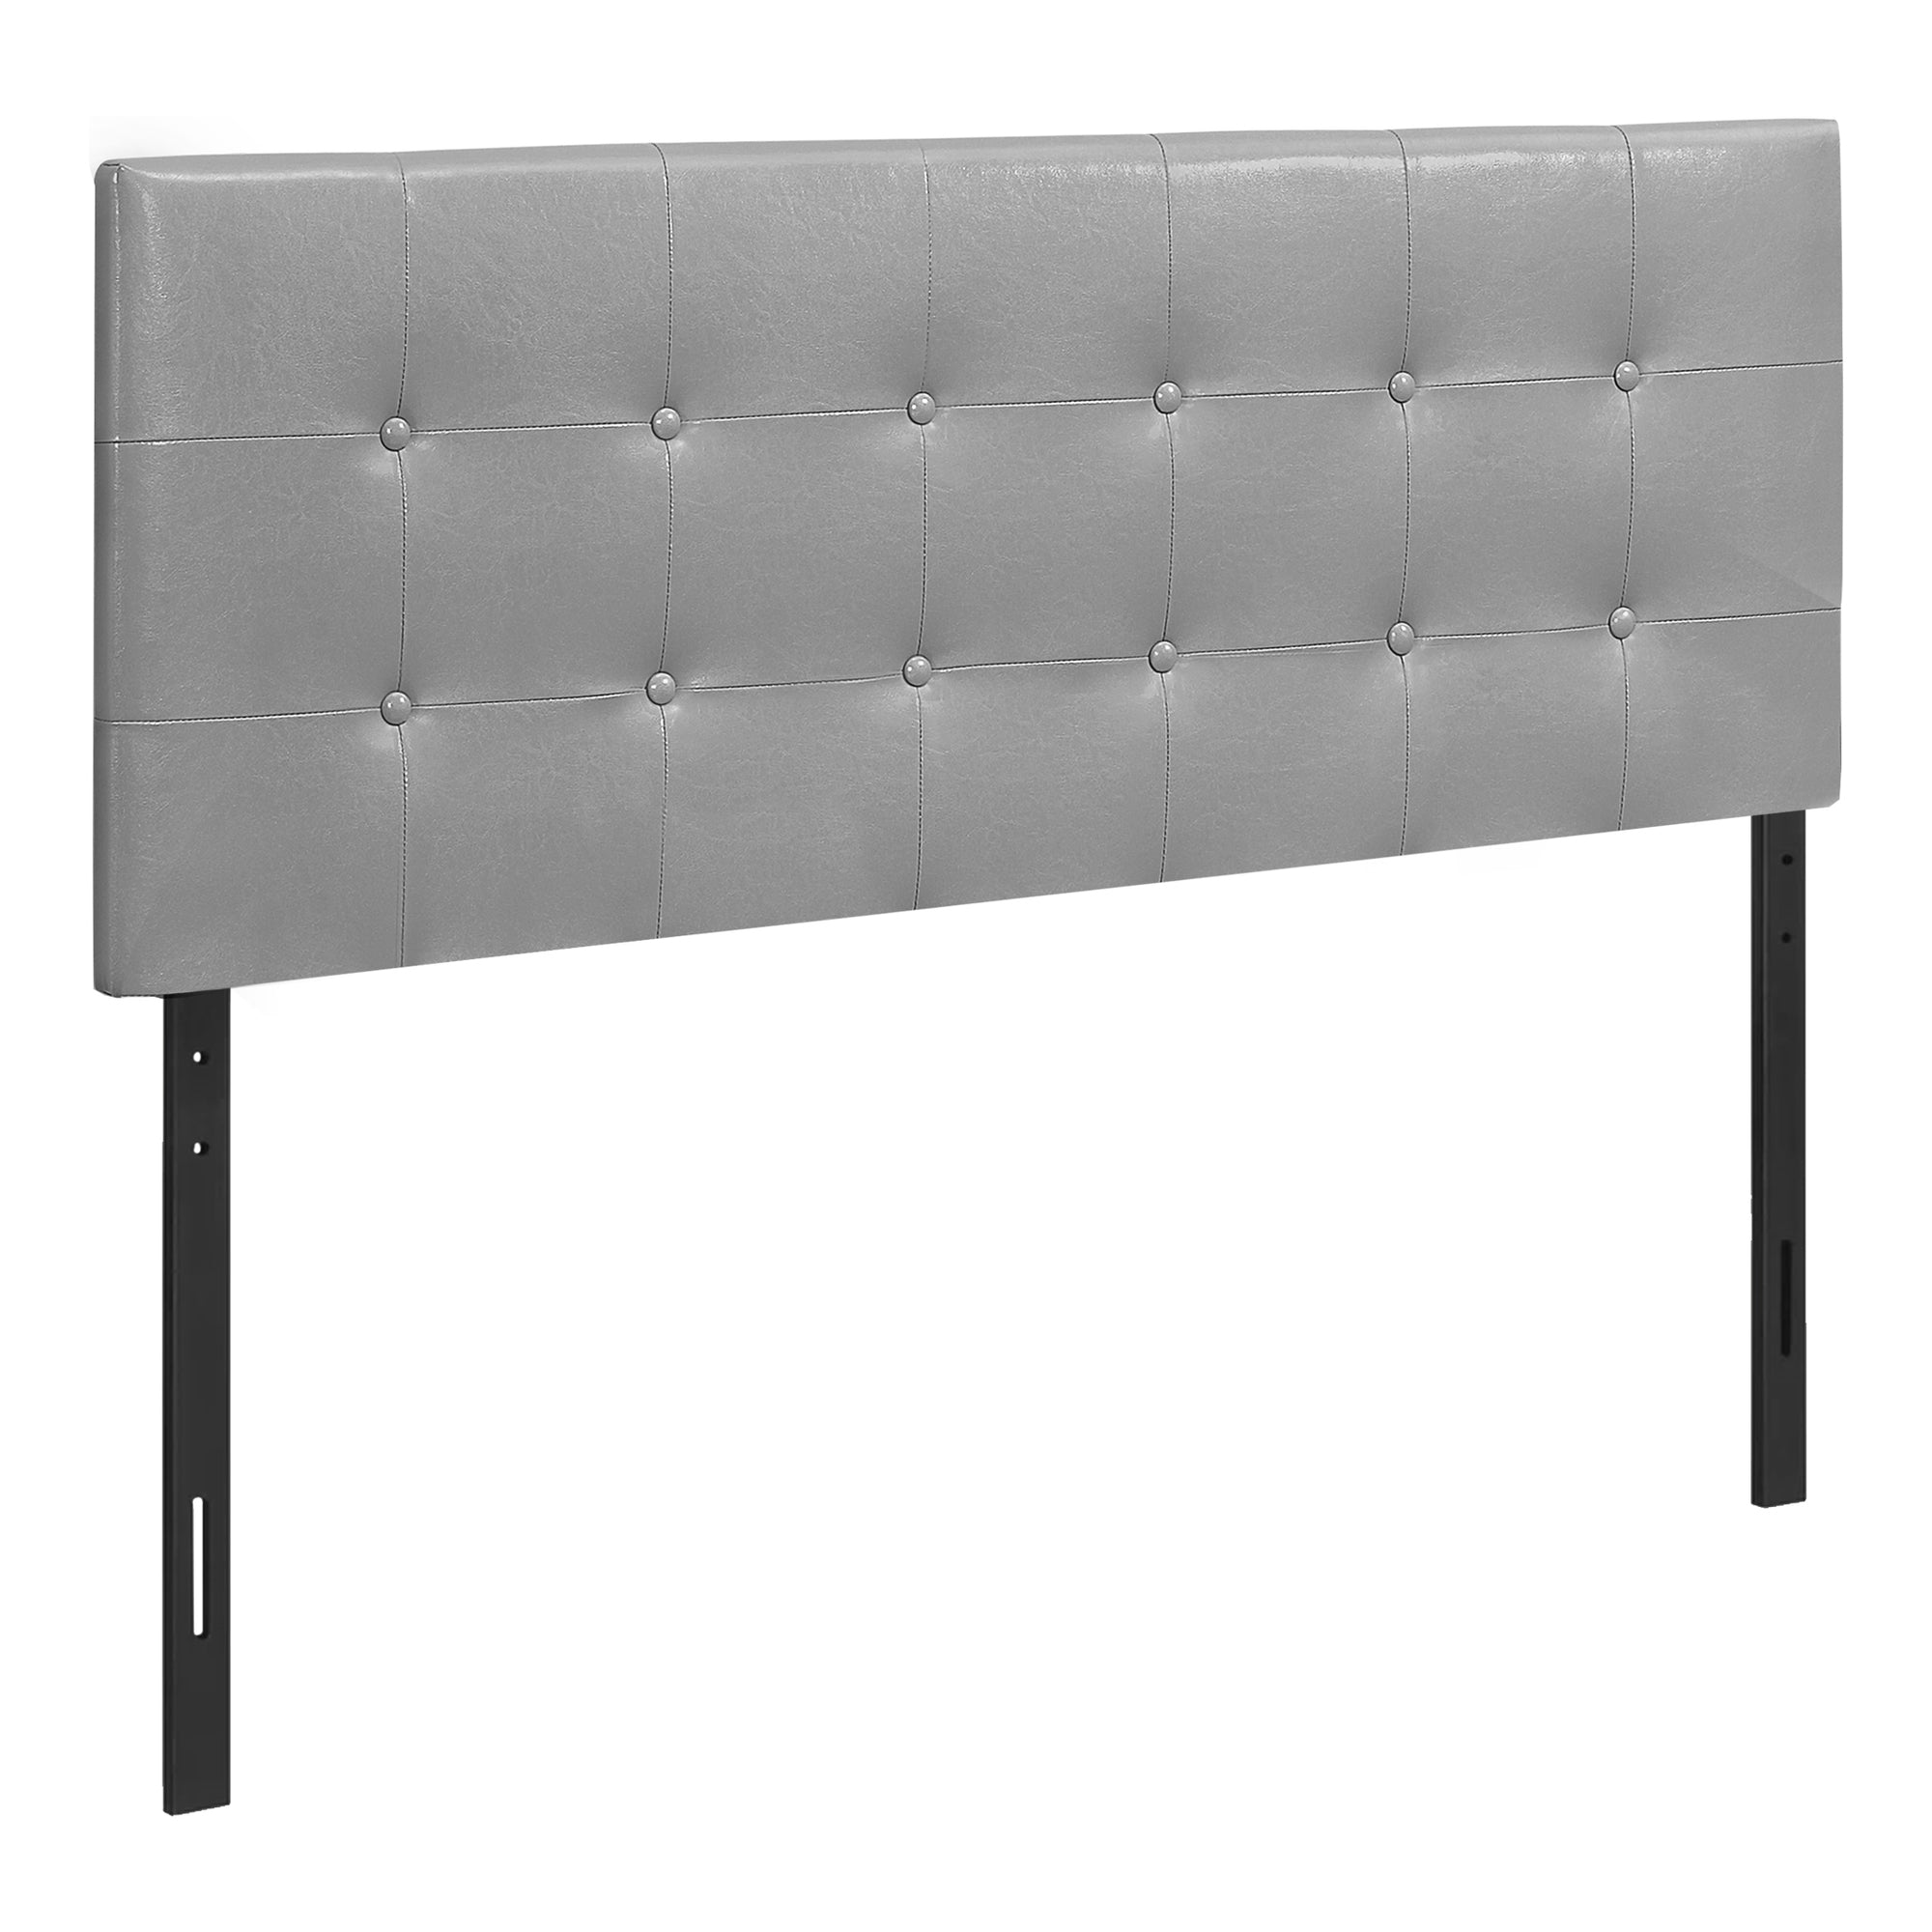 MN-366001F    Headboard, Bedroom, Full Size, Upholstered, Leather Look, Wooden Frame, Grey, Black, Contemporary, Modern